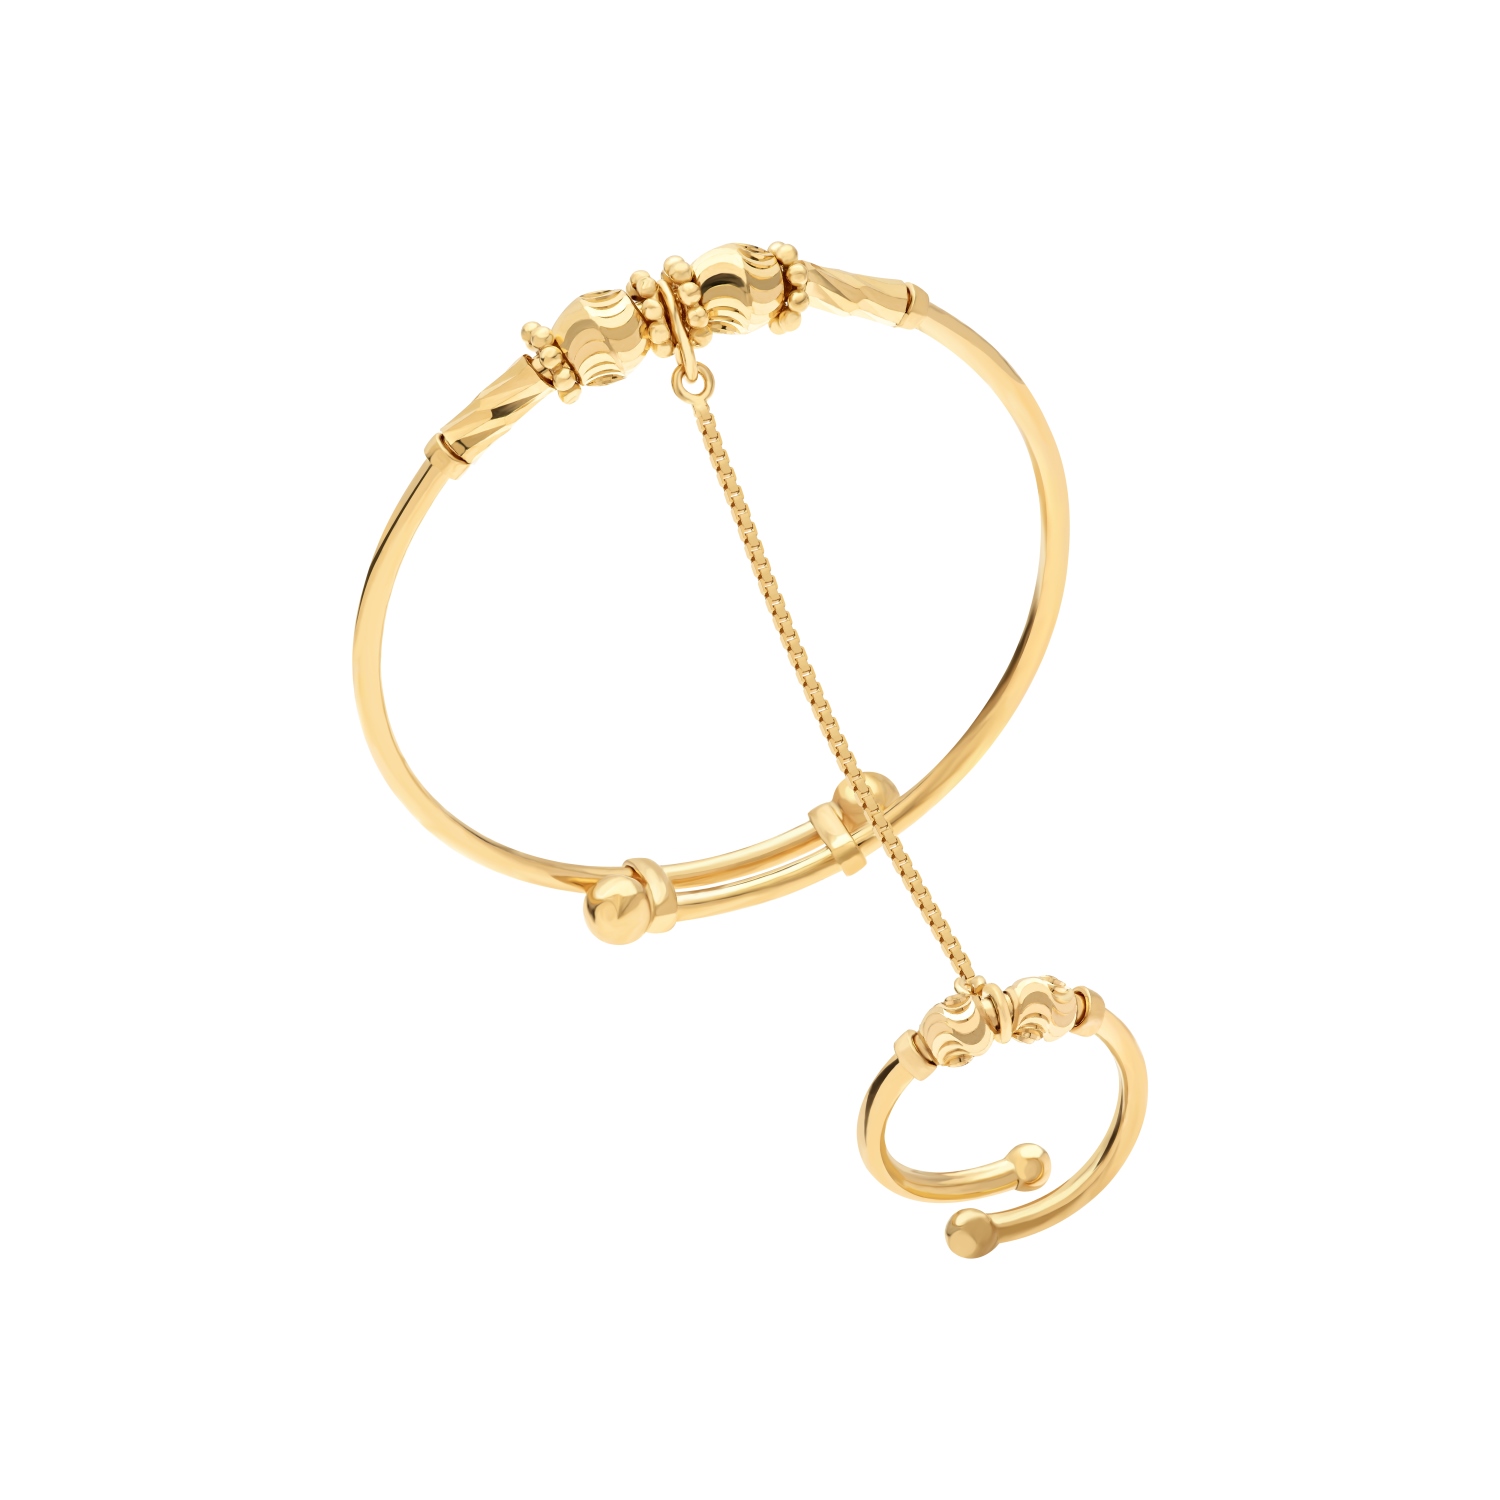 Buy Beautiful Gold Baby Bangle With Ring 21 KT in Kuwait | FKJBNG21K7514 –  FK Jewellers